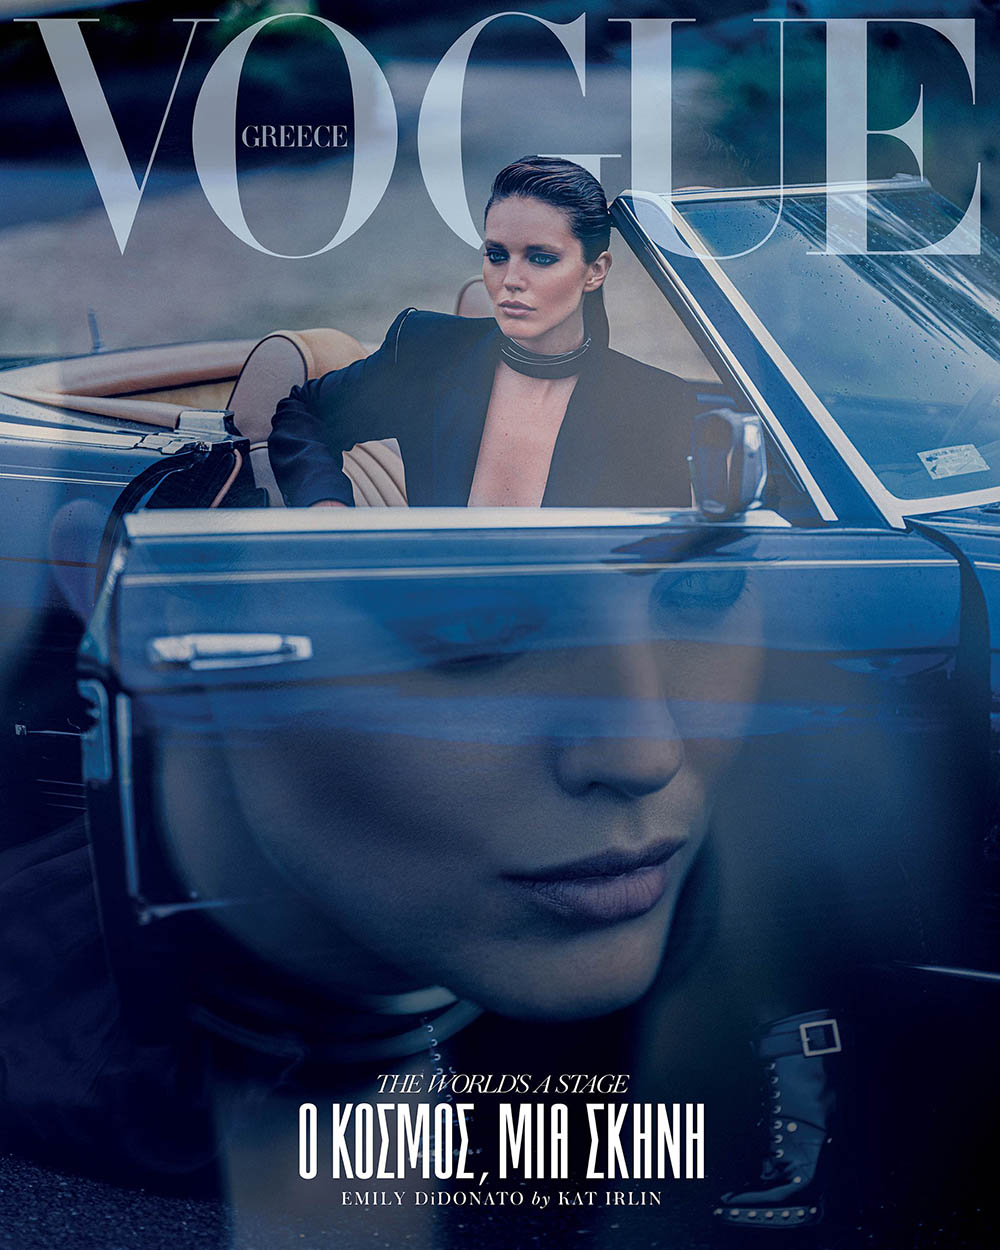 Emily DiDonato covers Vogue Greece October 2019 by Kat Irlin